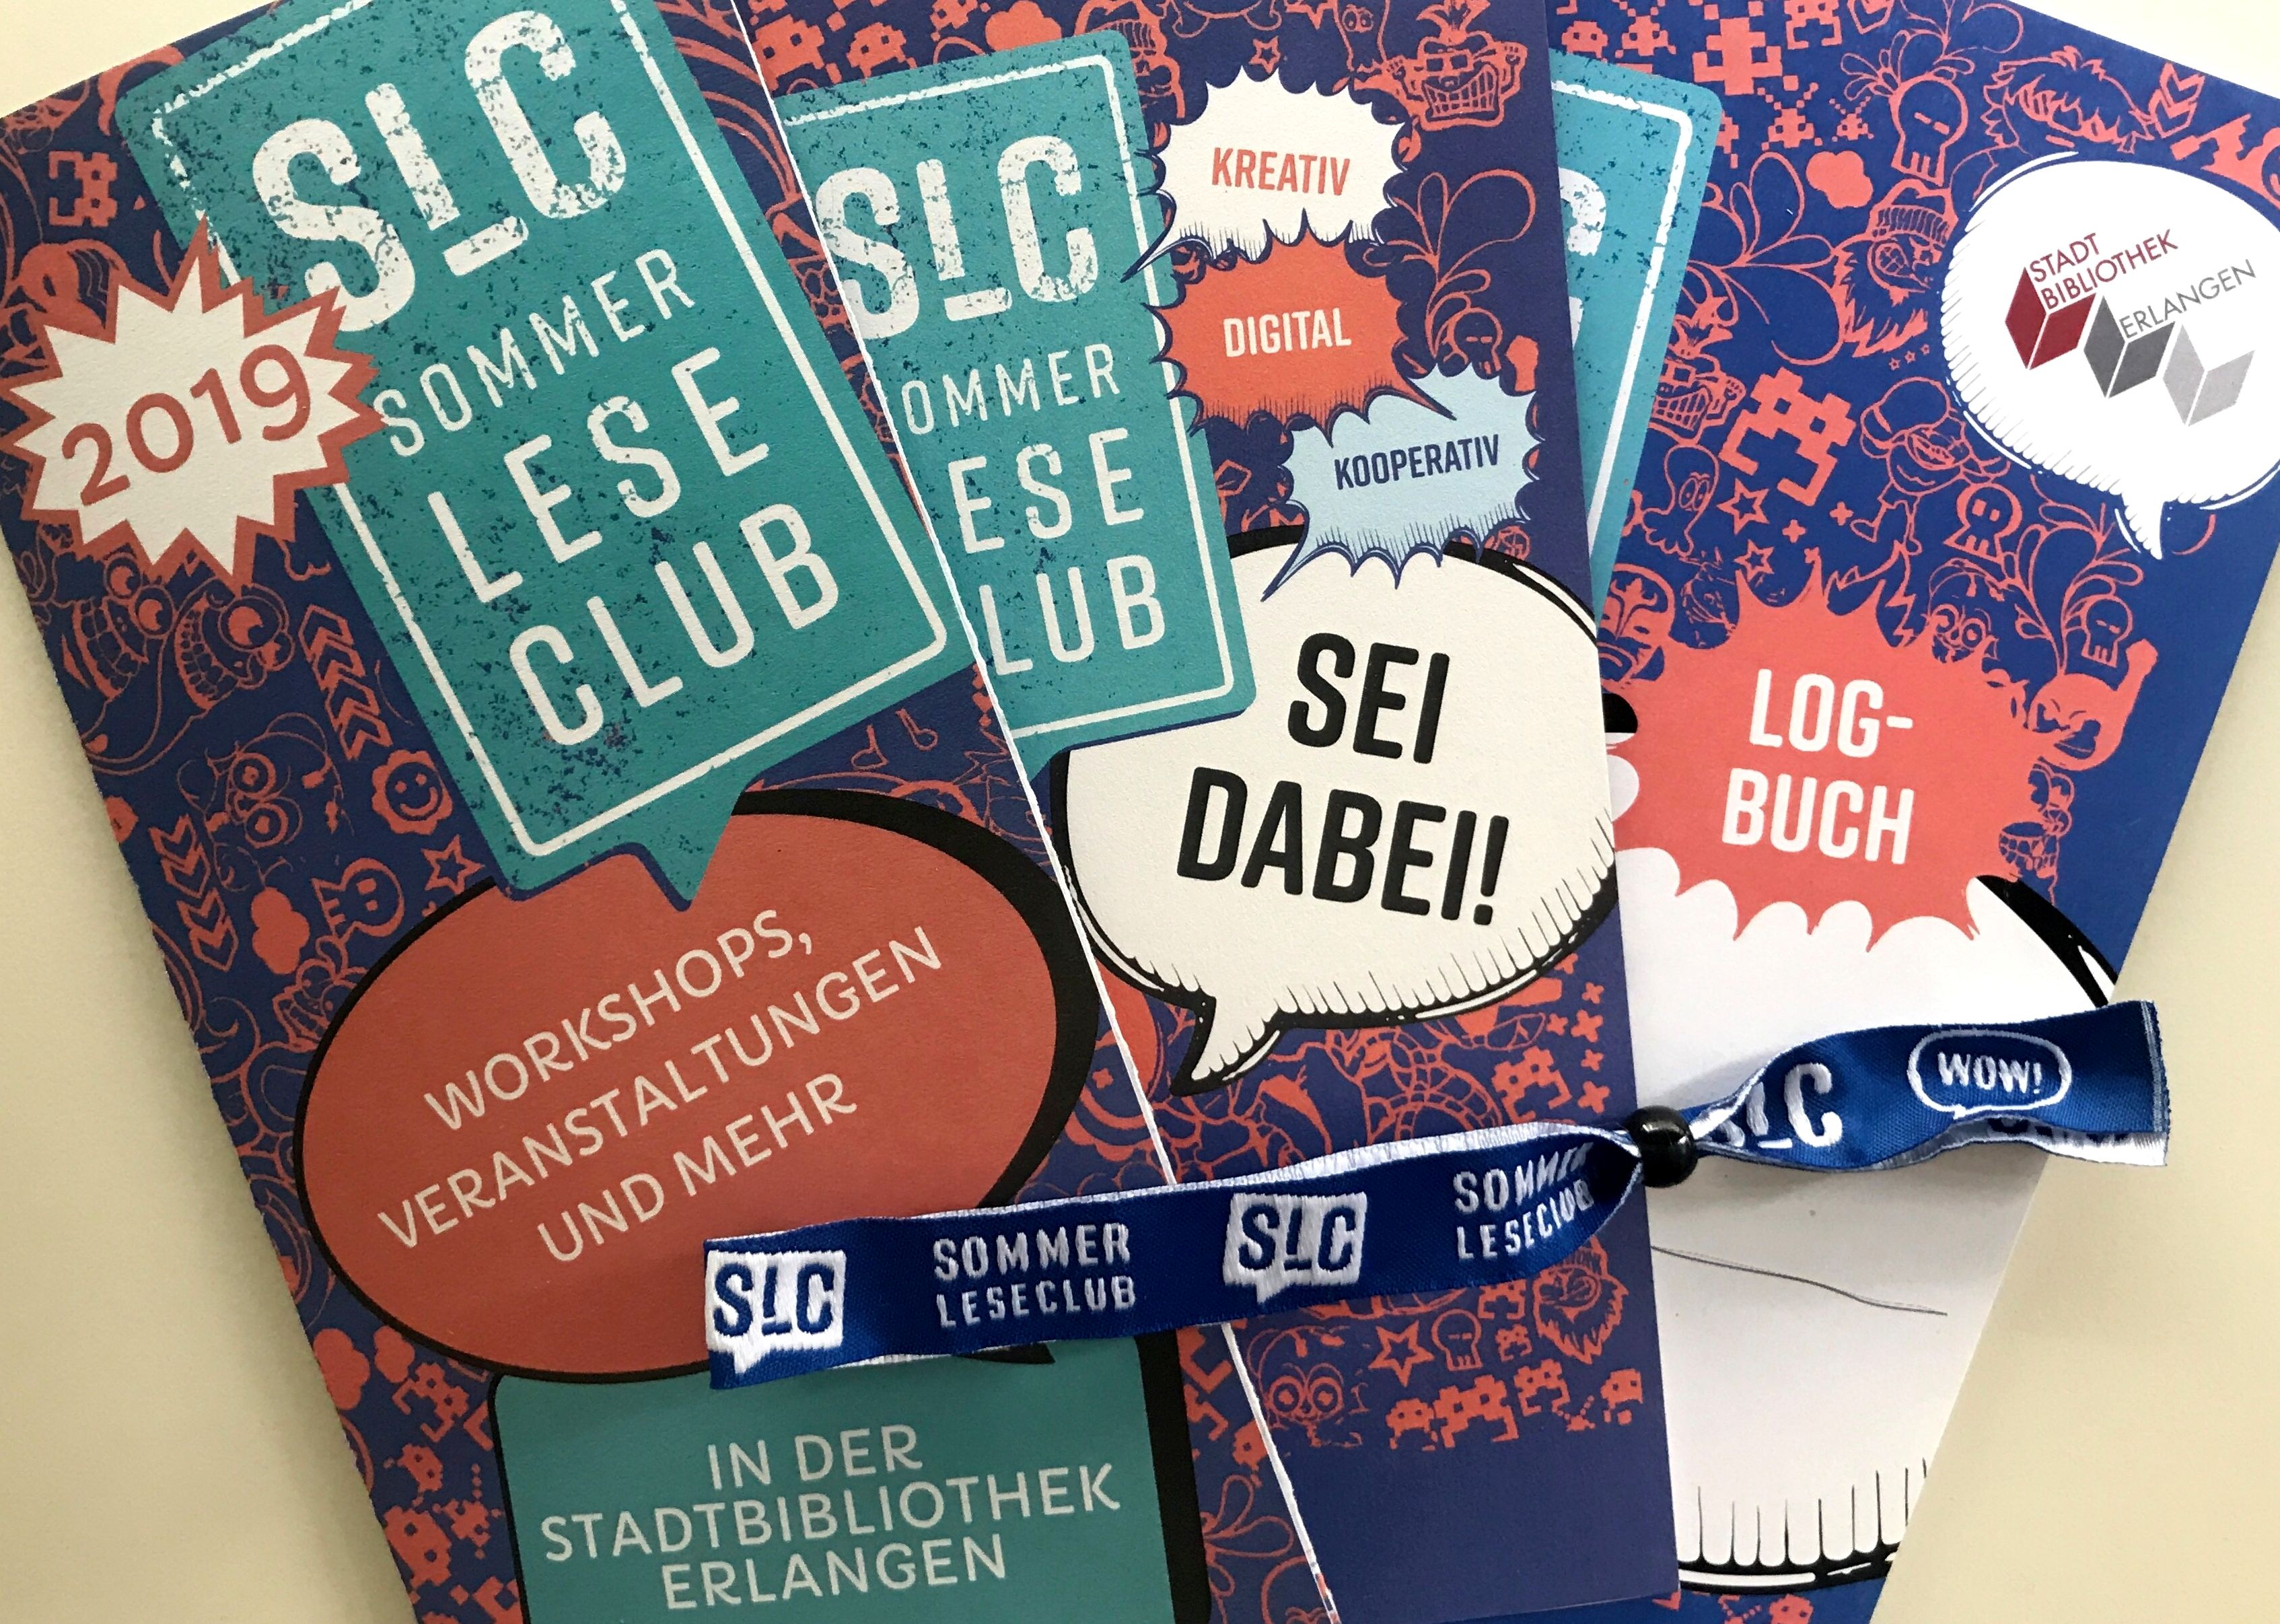 Sommerleseclub 2019: (Fast) alles neu